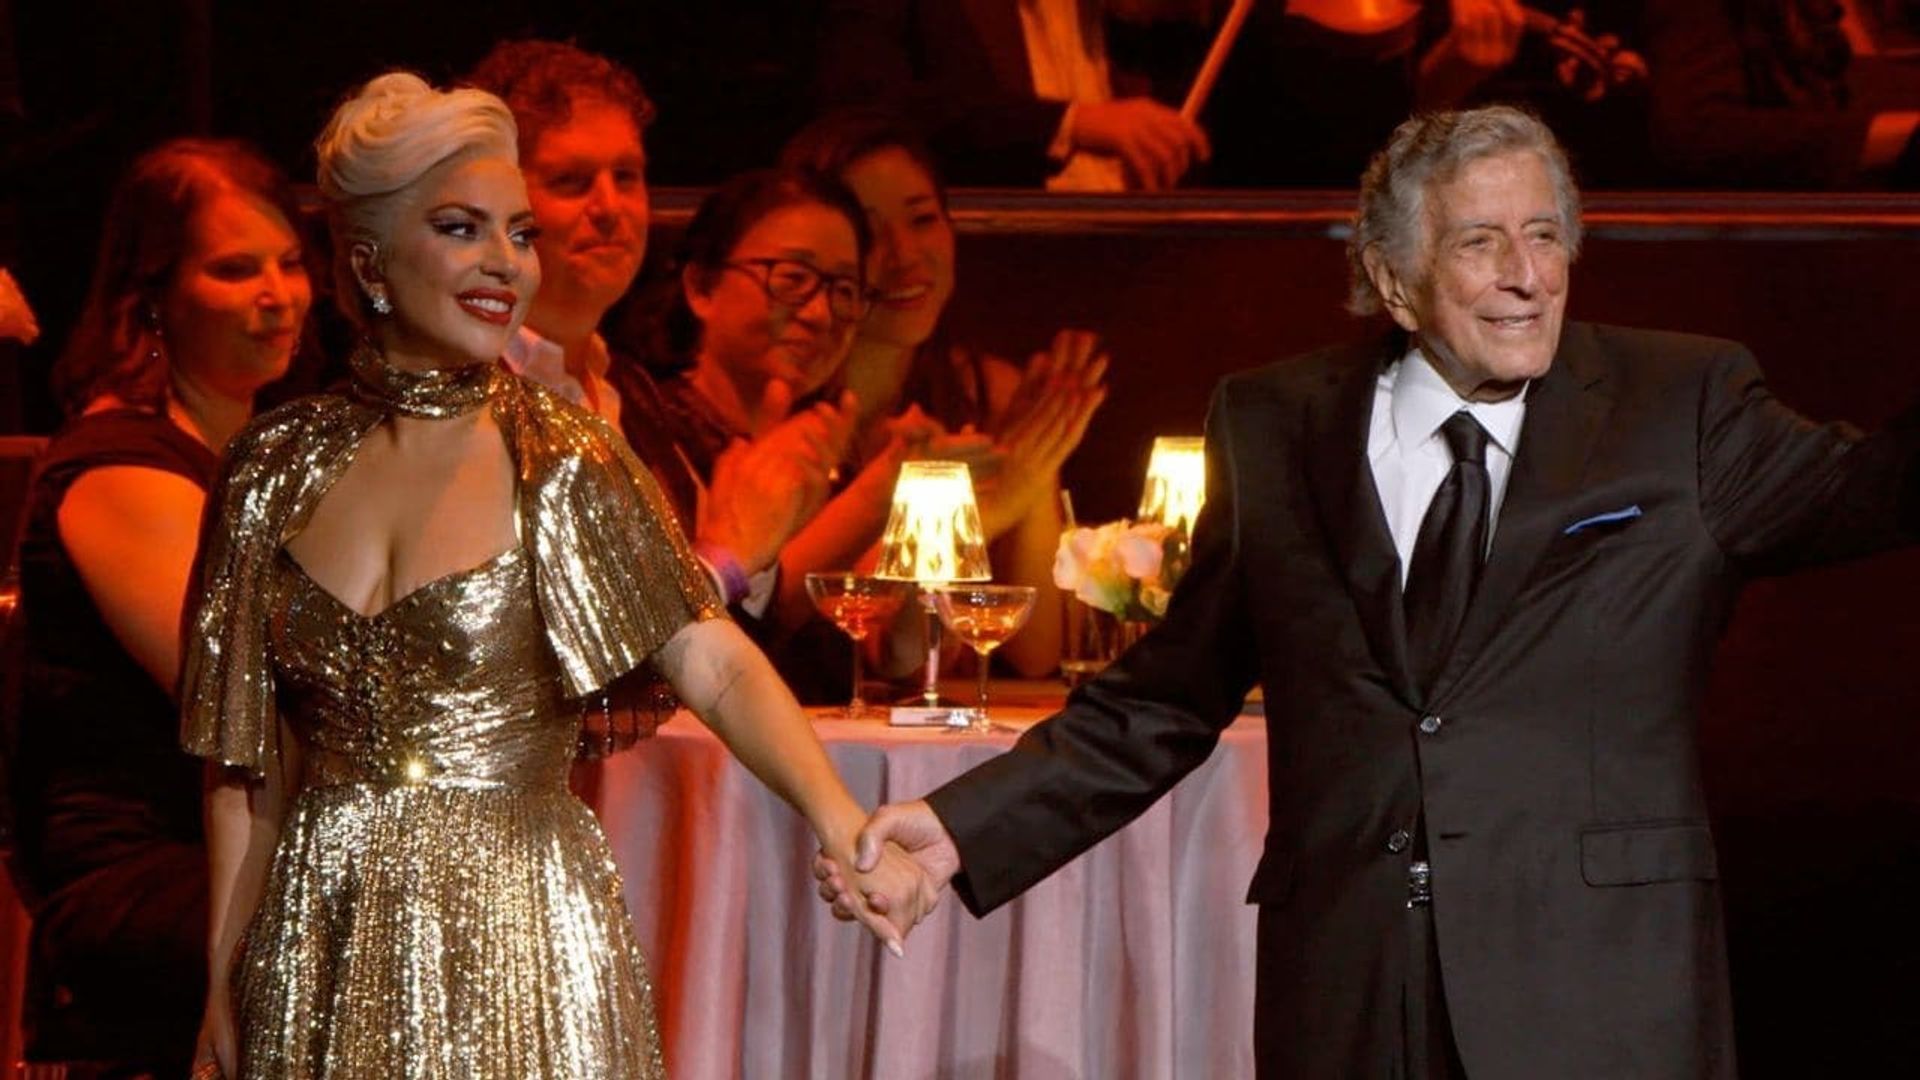 One Last Time: An Evening with Tony Bennett and Lady Gaga background